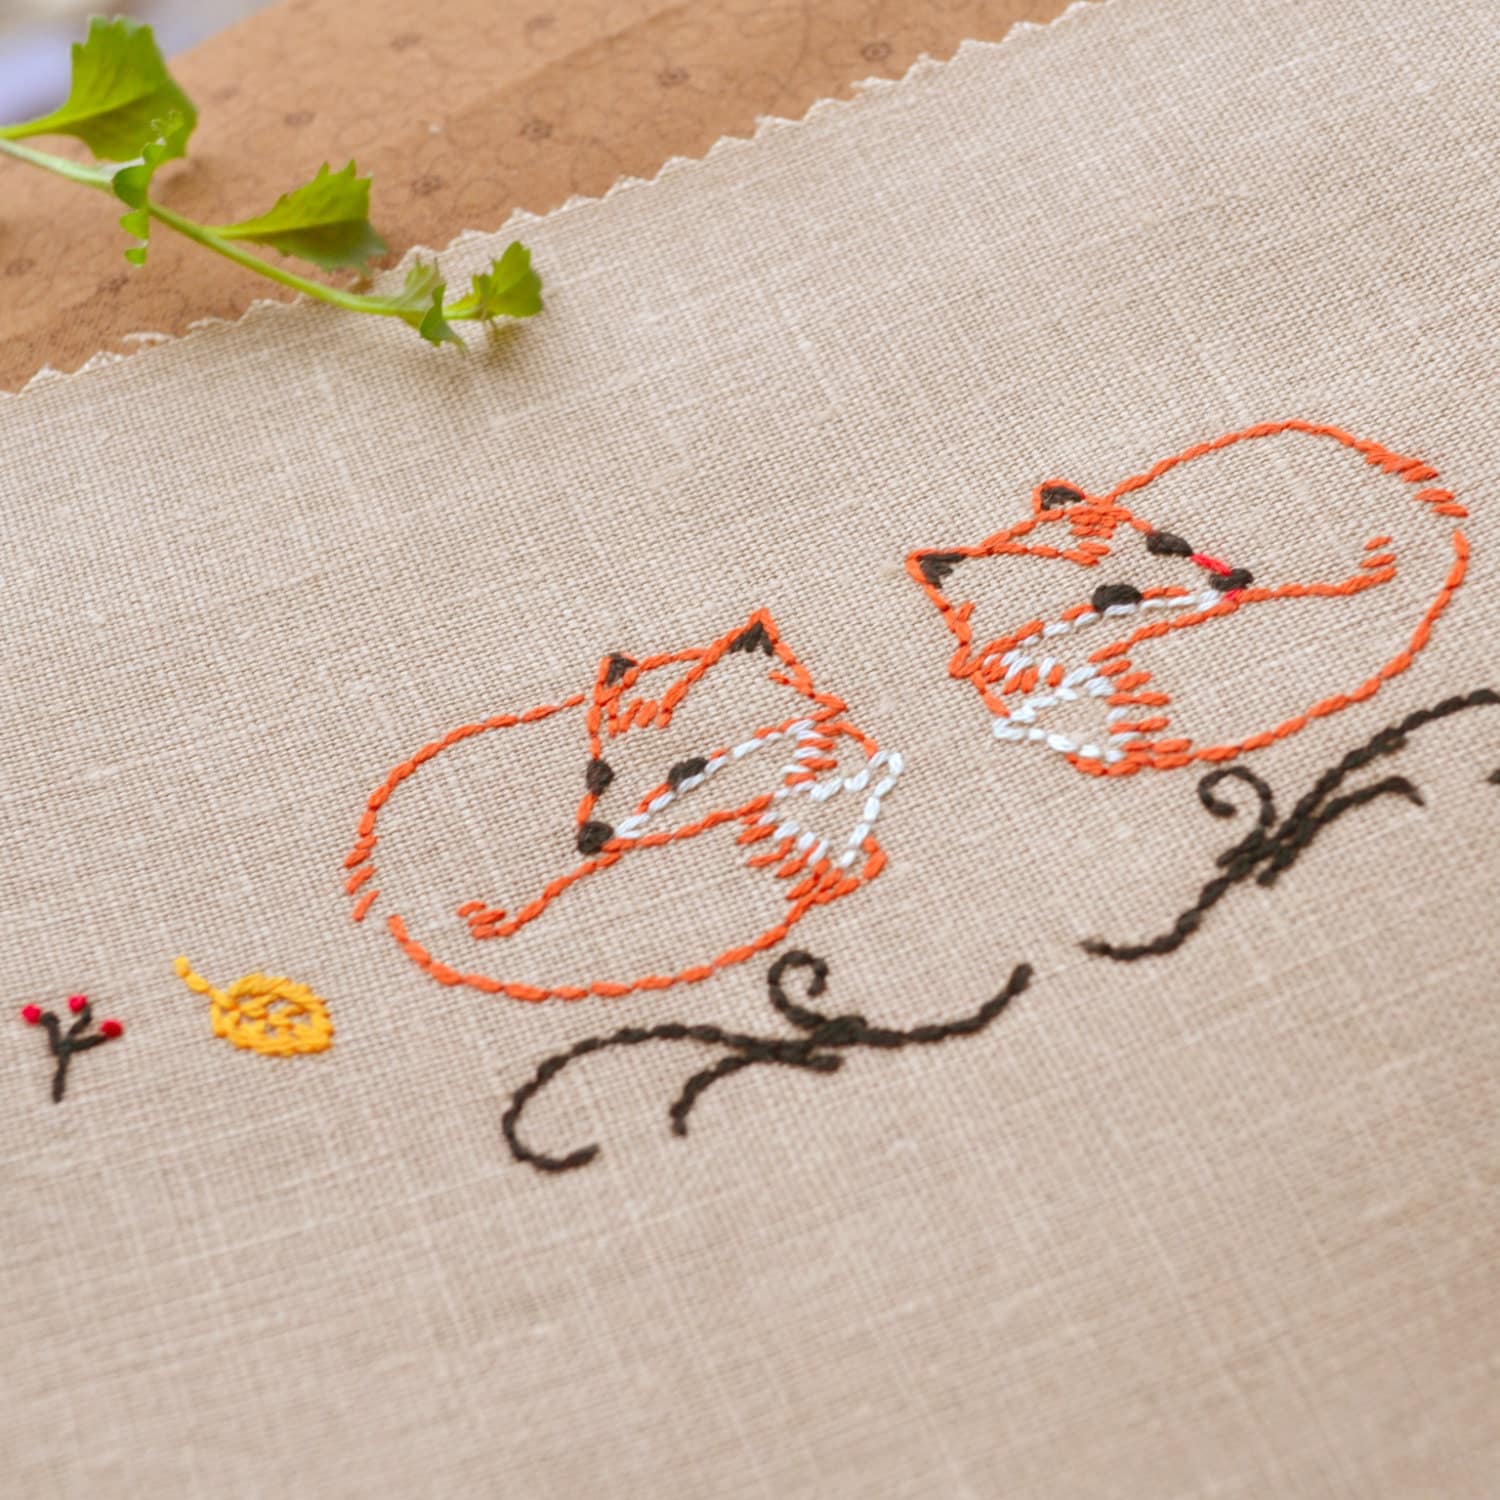 Download Embroidery Pattern Fox embroidery woodland embroidery hand